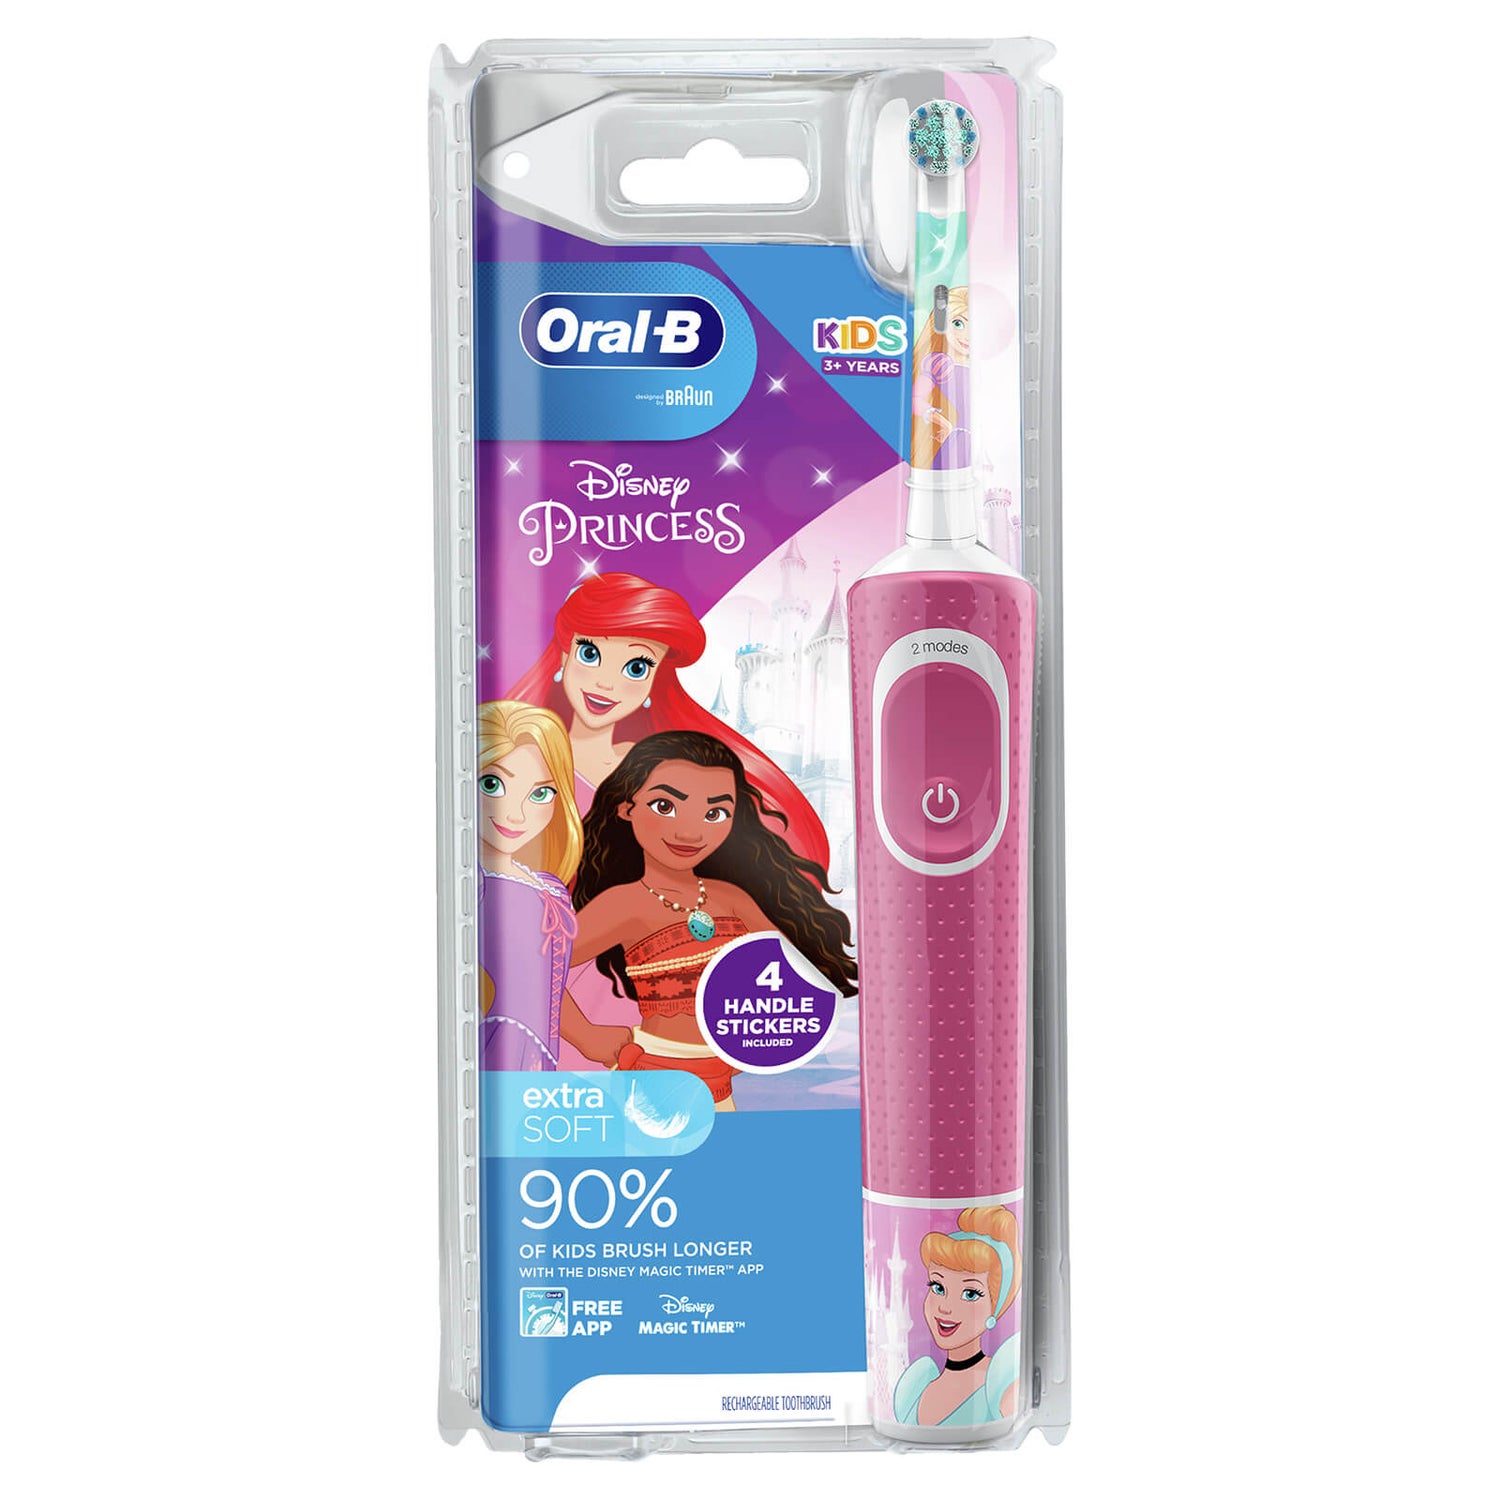 Oral-B Kids Disney Princesses Electric Rechargeable Toothbrush for Ages 3+, Christmas Gift